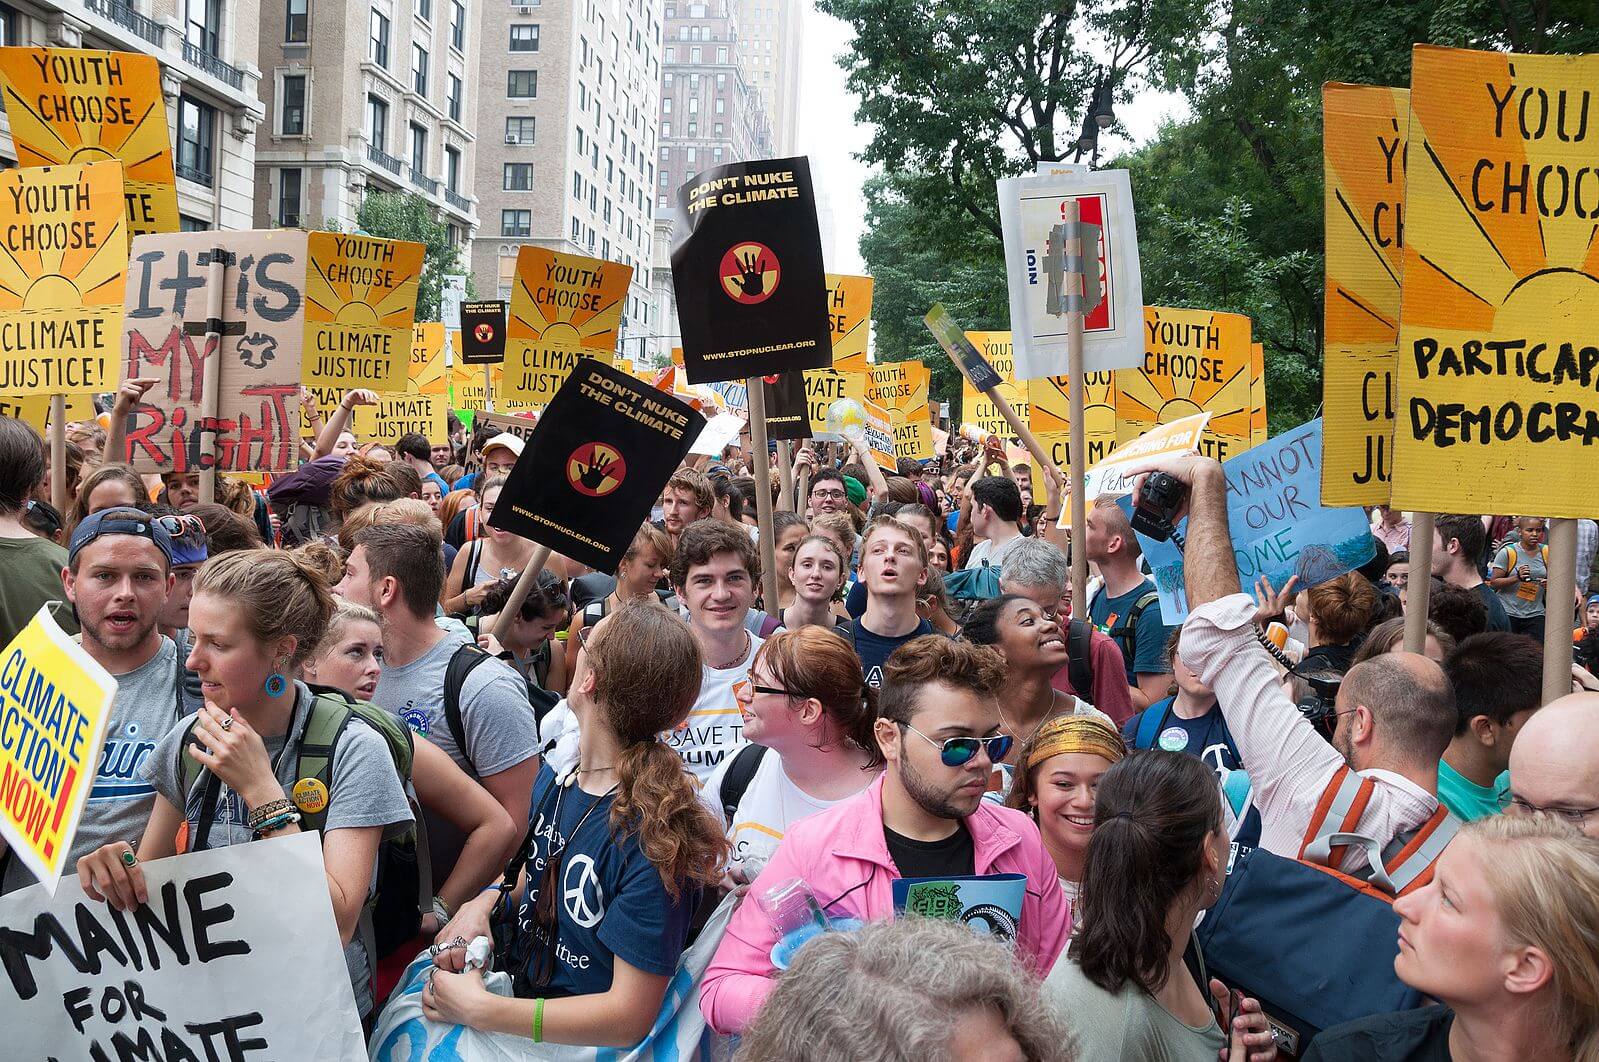 People's Climate March rally in New York City, Sept. 21 2014.